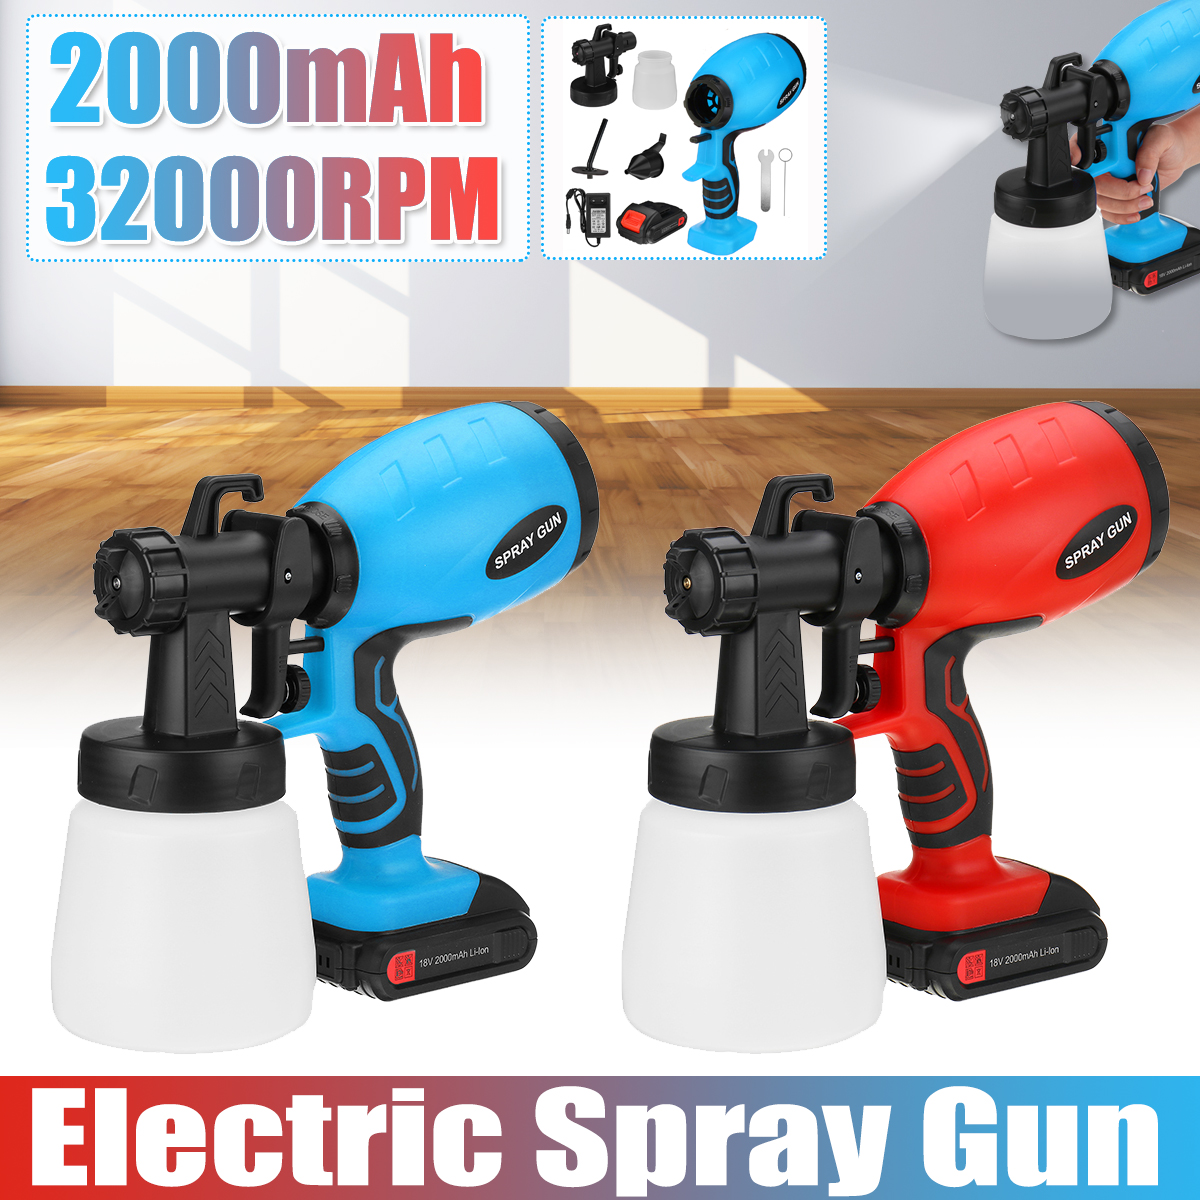 2000mAh-Portable-Electric-Paint-Sprayer-Wireless-Handheld-Spray-Guns-Home-Indoor-Fence-Painting-Tool-1851241-1